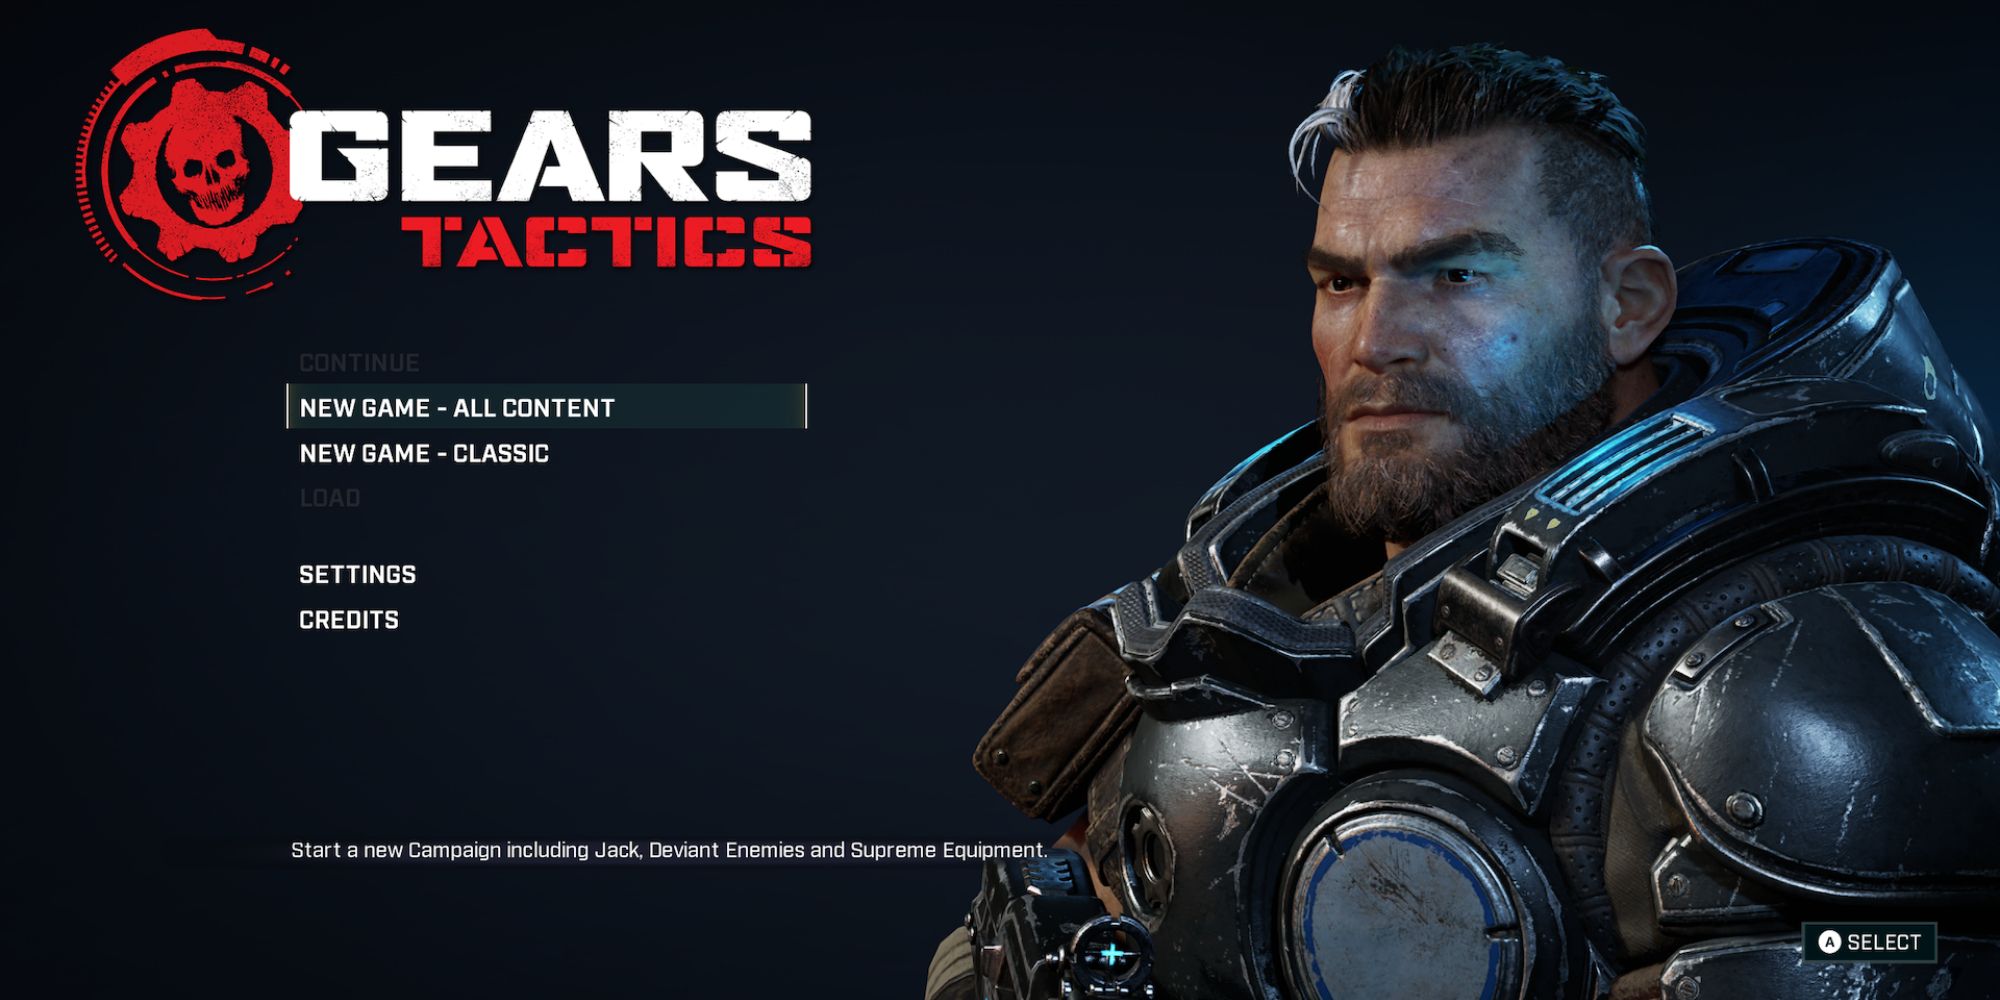 gears tactics all content or classic